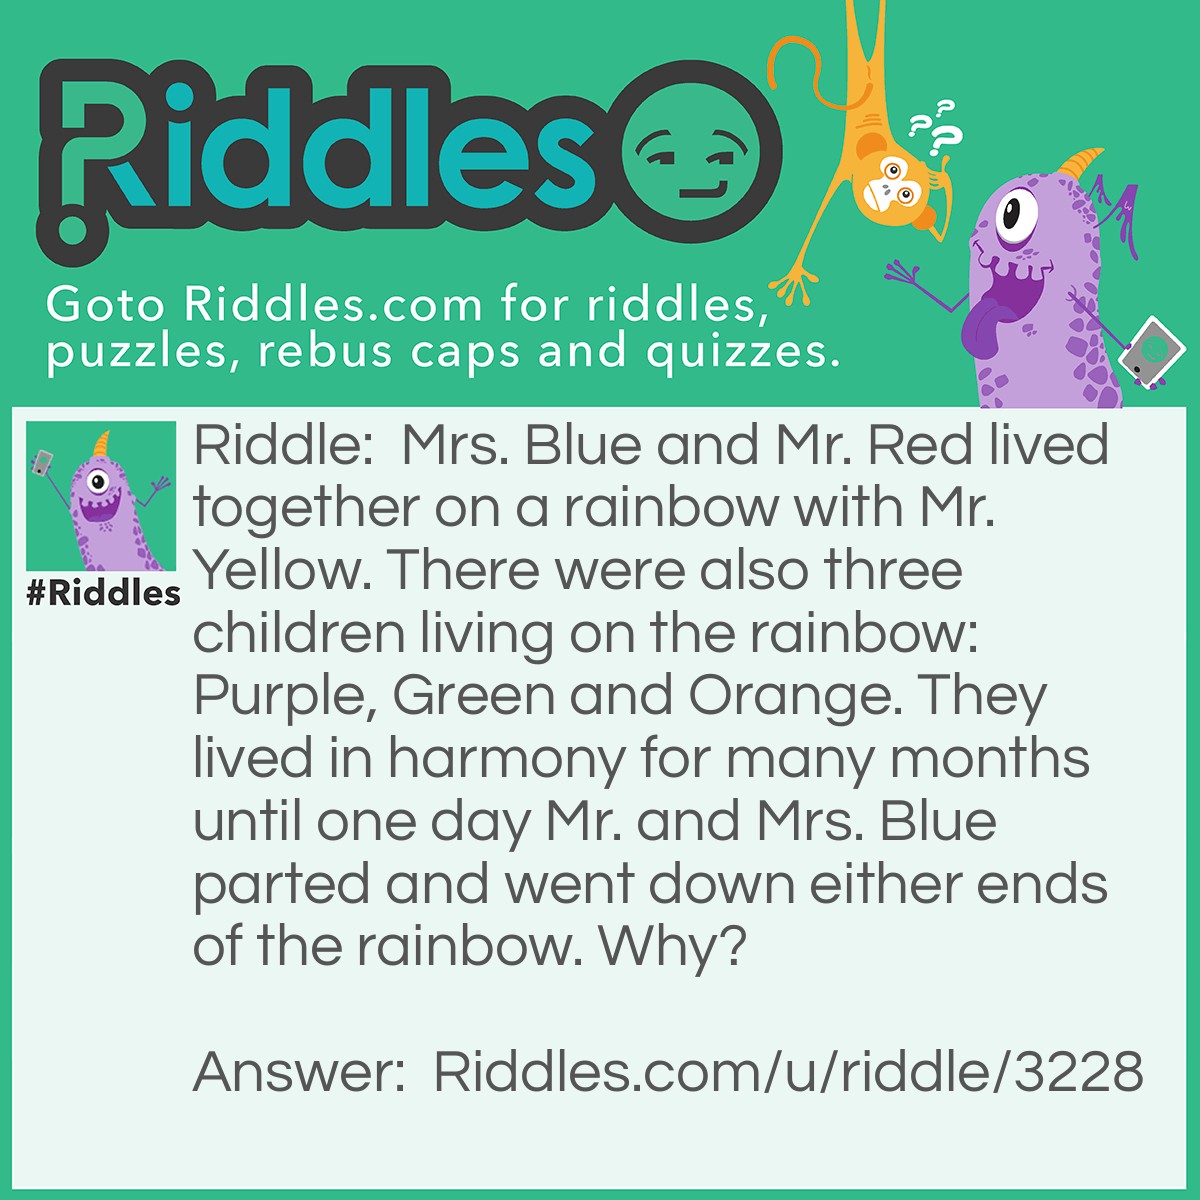 Riddle: Mrs. Blue and Mr. Red lived together on a rainbow with Mr. Yellow. There were also three children living on the rainbow: Purple, Green and Orange. They lived in harmony for many months until one day Mr. and Mrs. Blue parted and went down either ends of the rainbow. Why? Answer: Mrs. Blue and Mr. Red had their one child Purple. One day Mr. Red had an affair with Mr. Yellow and they had a Orange child. After figuring out what had taken place, Mrs. Blue wanted to get her own back and so she had an affair with Mr. Yellow and they had a Green baby. Mr. Red was rather confused when his wife gave birth to a Green baby as Red and Blue makes purple not green. Therefore he figured out what had taken place behind his back and parted with Mrs. Blue!